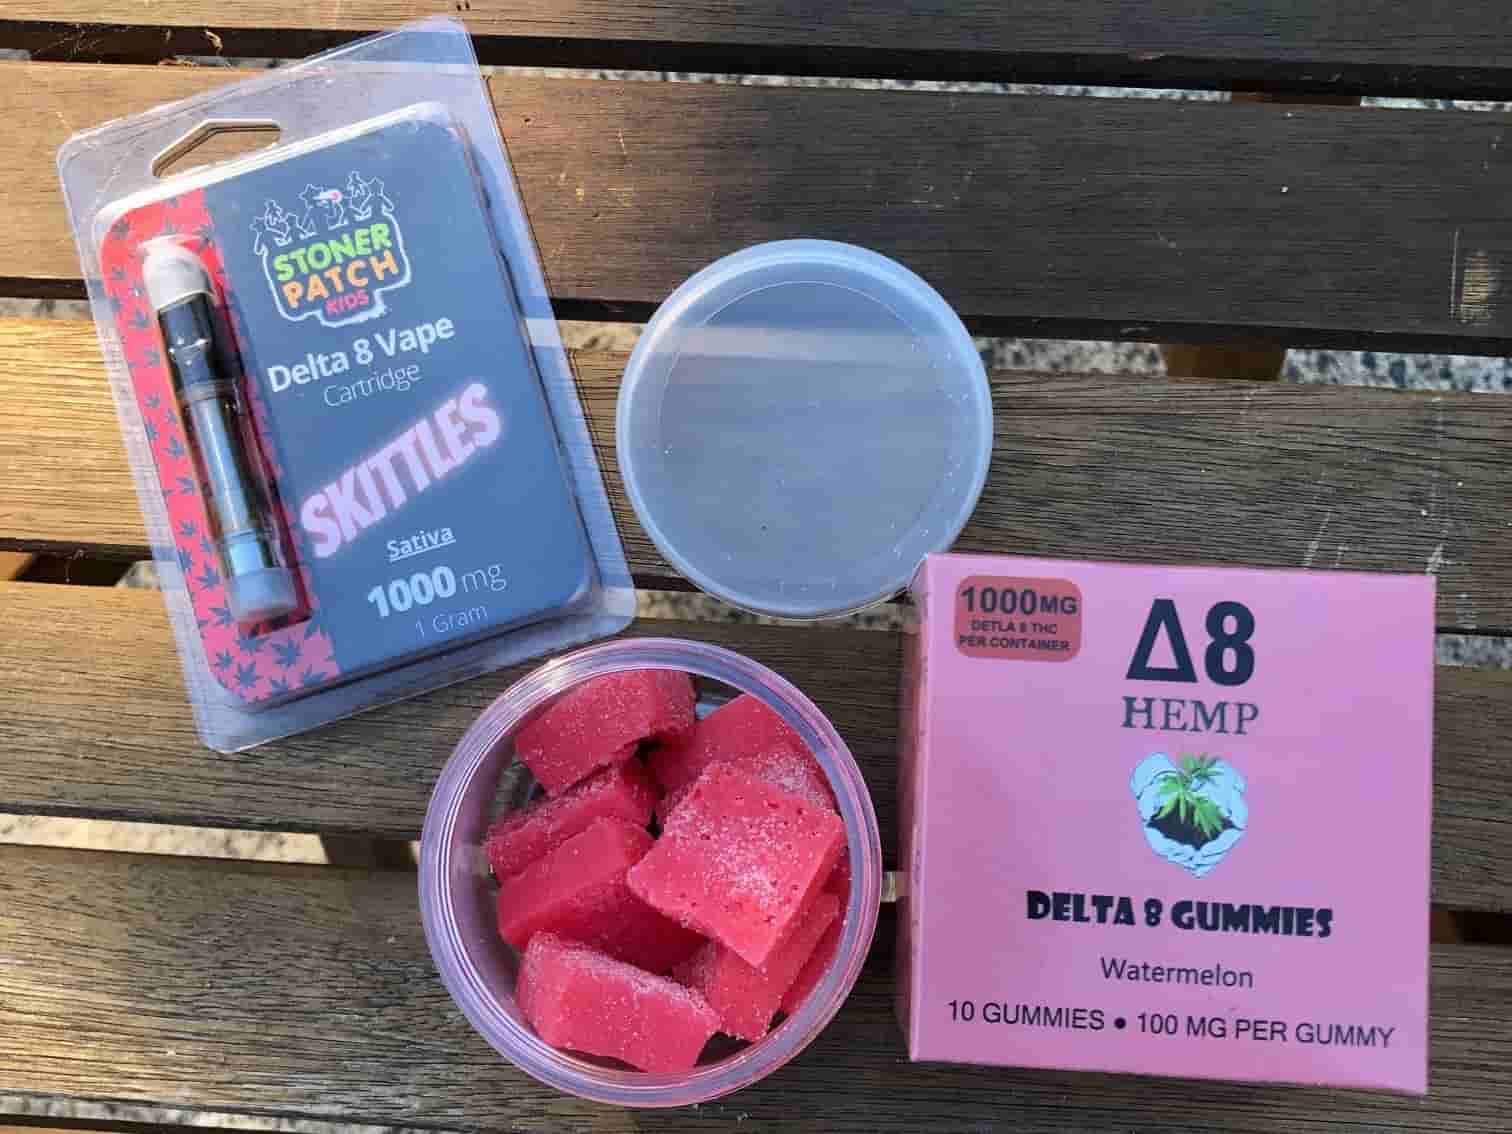 CAKE WEBSITE DELTA 8 - Gummies|Thc|Products|Hemp|Product|Brand|Effects|Delta|Gummy|Cbd|Origin|Quality|Dosage|Delta-8|Dose|Usasource|Flavors|Brands|Ingredients|Range|Customers|Edibles|Cartridges|Reviews|Side|List|Health|Cannabis|Lab|Customer|Options|Benefits|Overviewproducts|Research|Time|Market|Drug|Farms|Party|People|Delta-8 Thc|Delta-8 Products|Delta-9 Thc|Delta-8 Gummies|Delta-8 Thc Products|Delta-8 Brands|Customer Reviews|Brand Overviewproducts|Drug Tests|Free Shipping|Similar Benefits|Vape Cartridges|Hemp Doctor|United States|Third Party Lab|Drug Test|Thc Edibles|Health Canada|Cannabis Plant|Side Effects|Organic Hemp|Diamond Cbd|Reaction Time|Legal Hemp|Psychoactive Effects|Psychoactive Properties|Third Party|Dry Eyes|Delta-8 Market|Tolerance Level